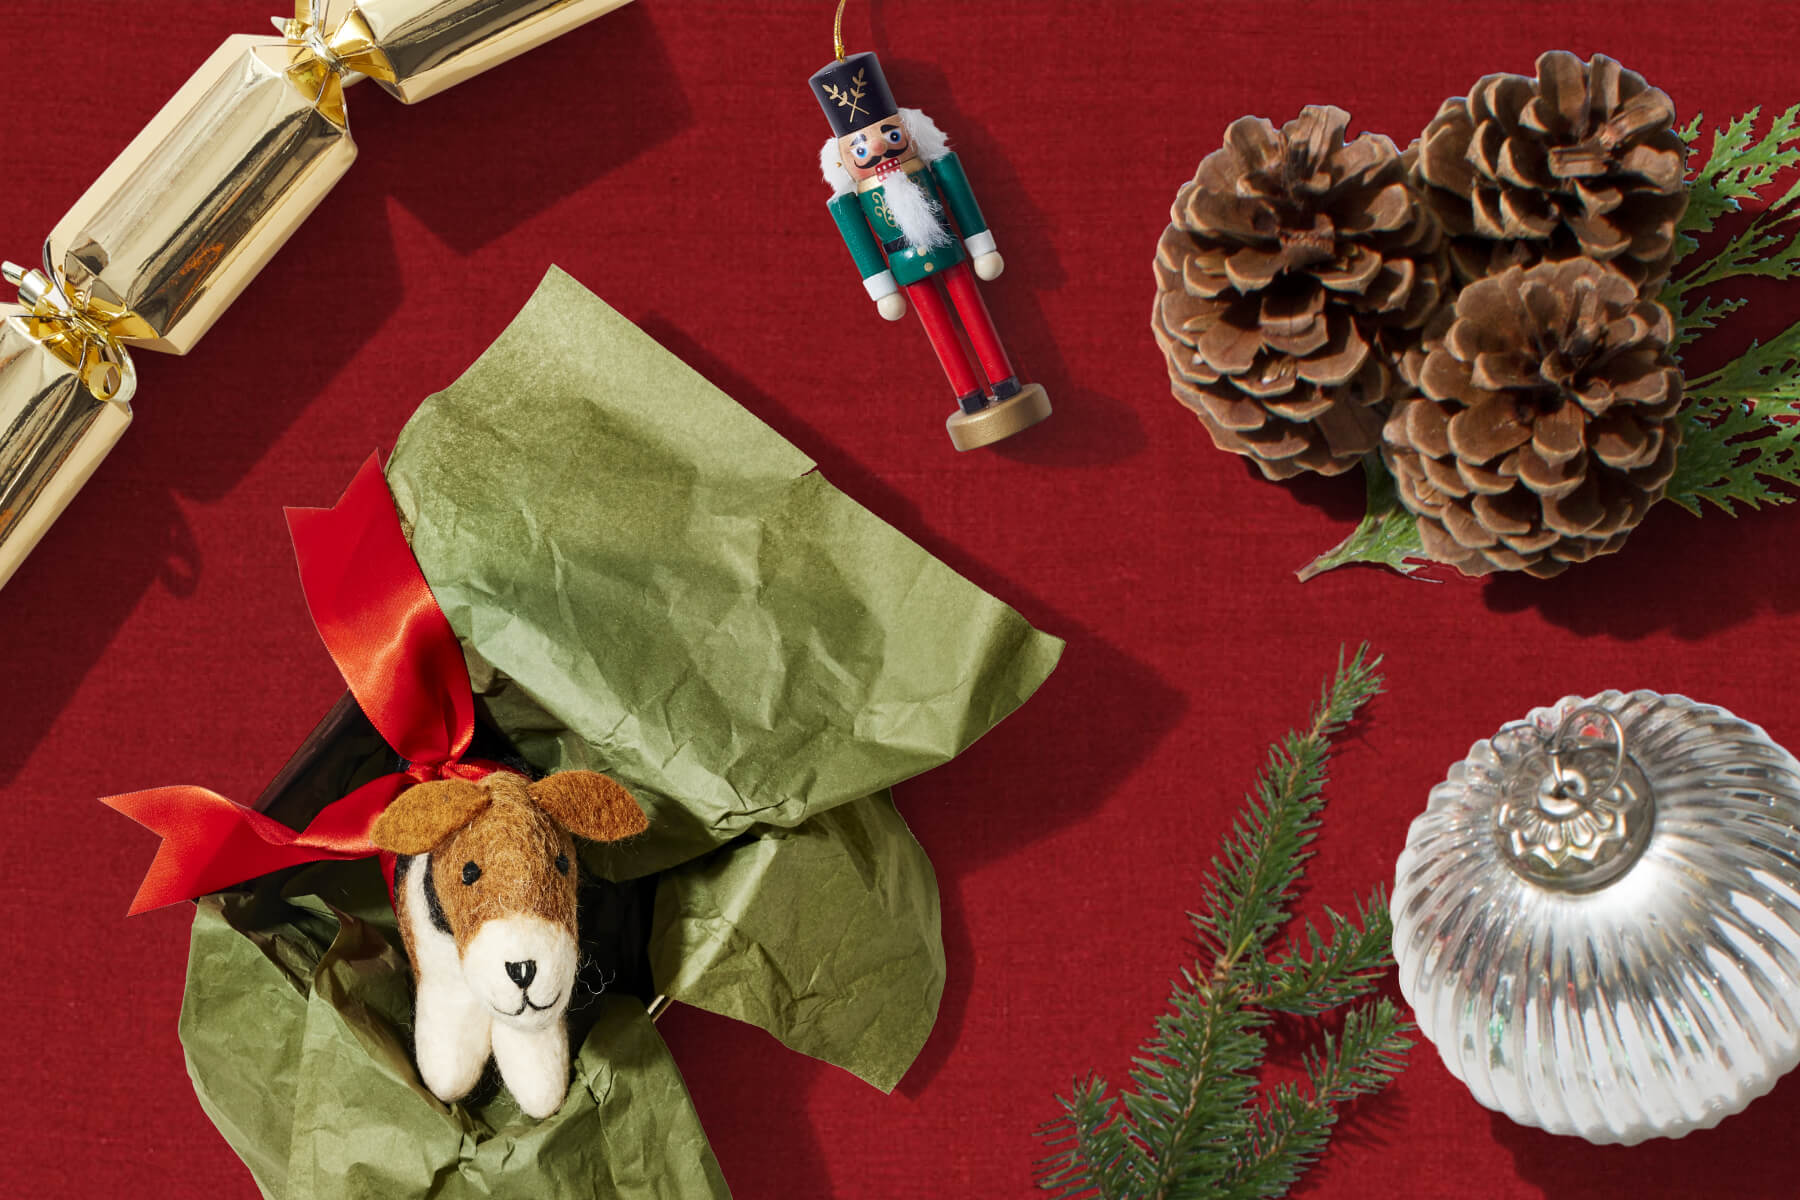 A collection of holiday gifts including a cracker, a felt dog ornament, a nutcracker ornament, and a bulb ornament, with greenery.